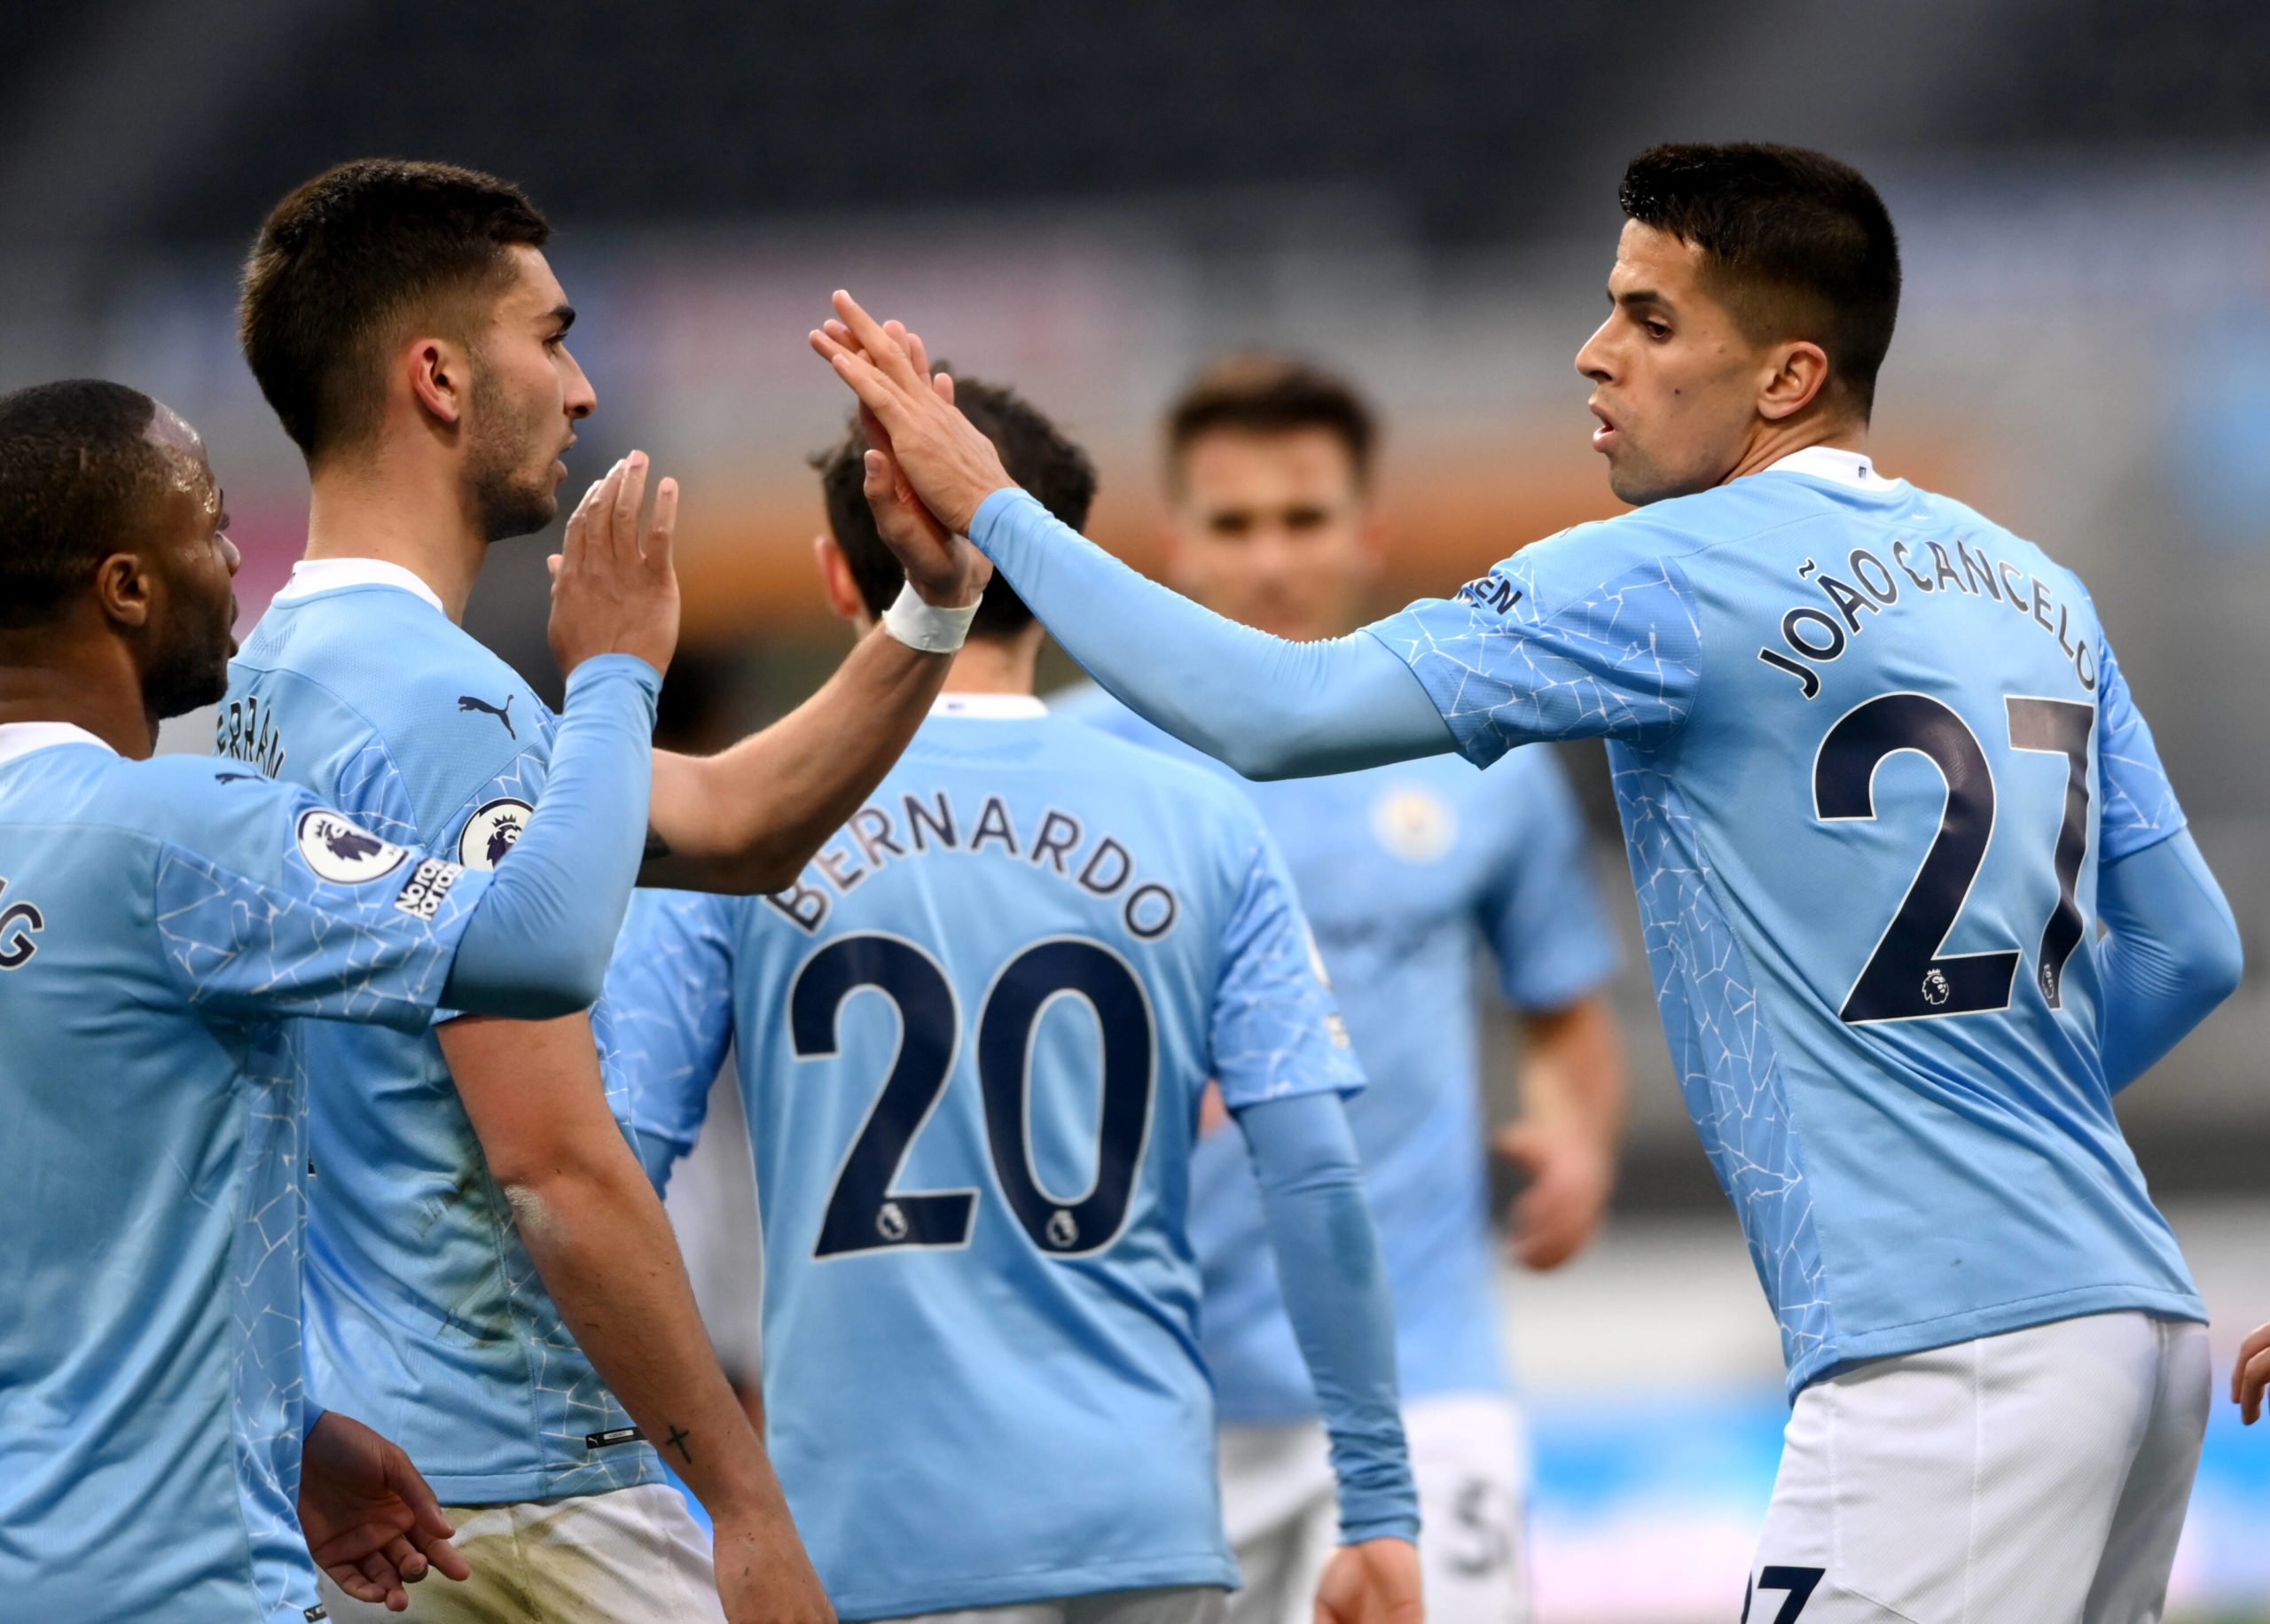 Manchester City's Season Review (Manchester City players are seen in the photo)